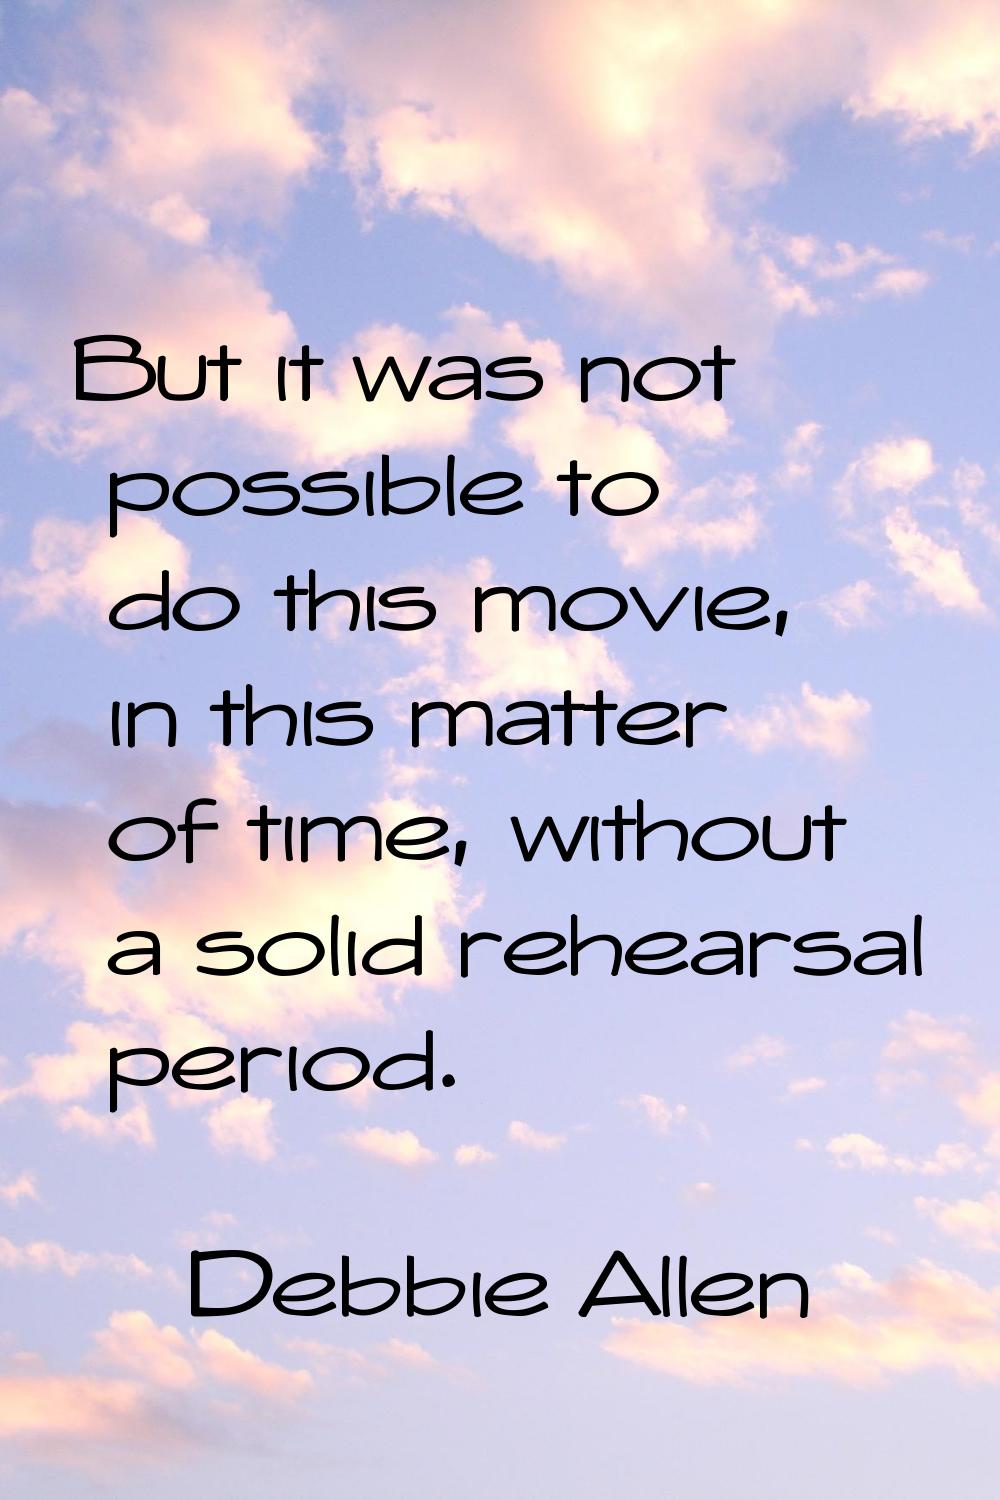 But it was not possible to do this movie, in this matter of time, without a solid rehearsal period.